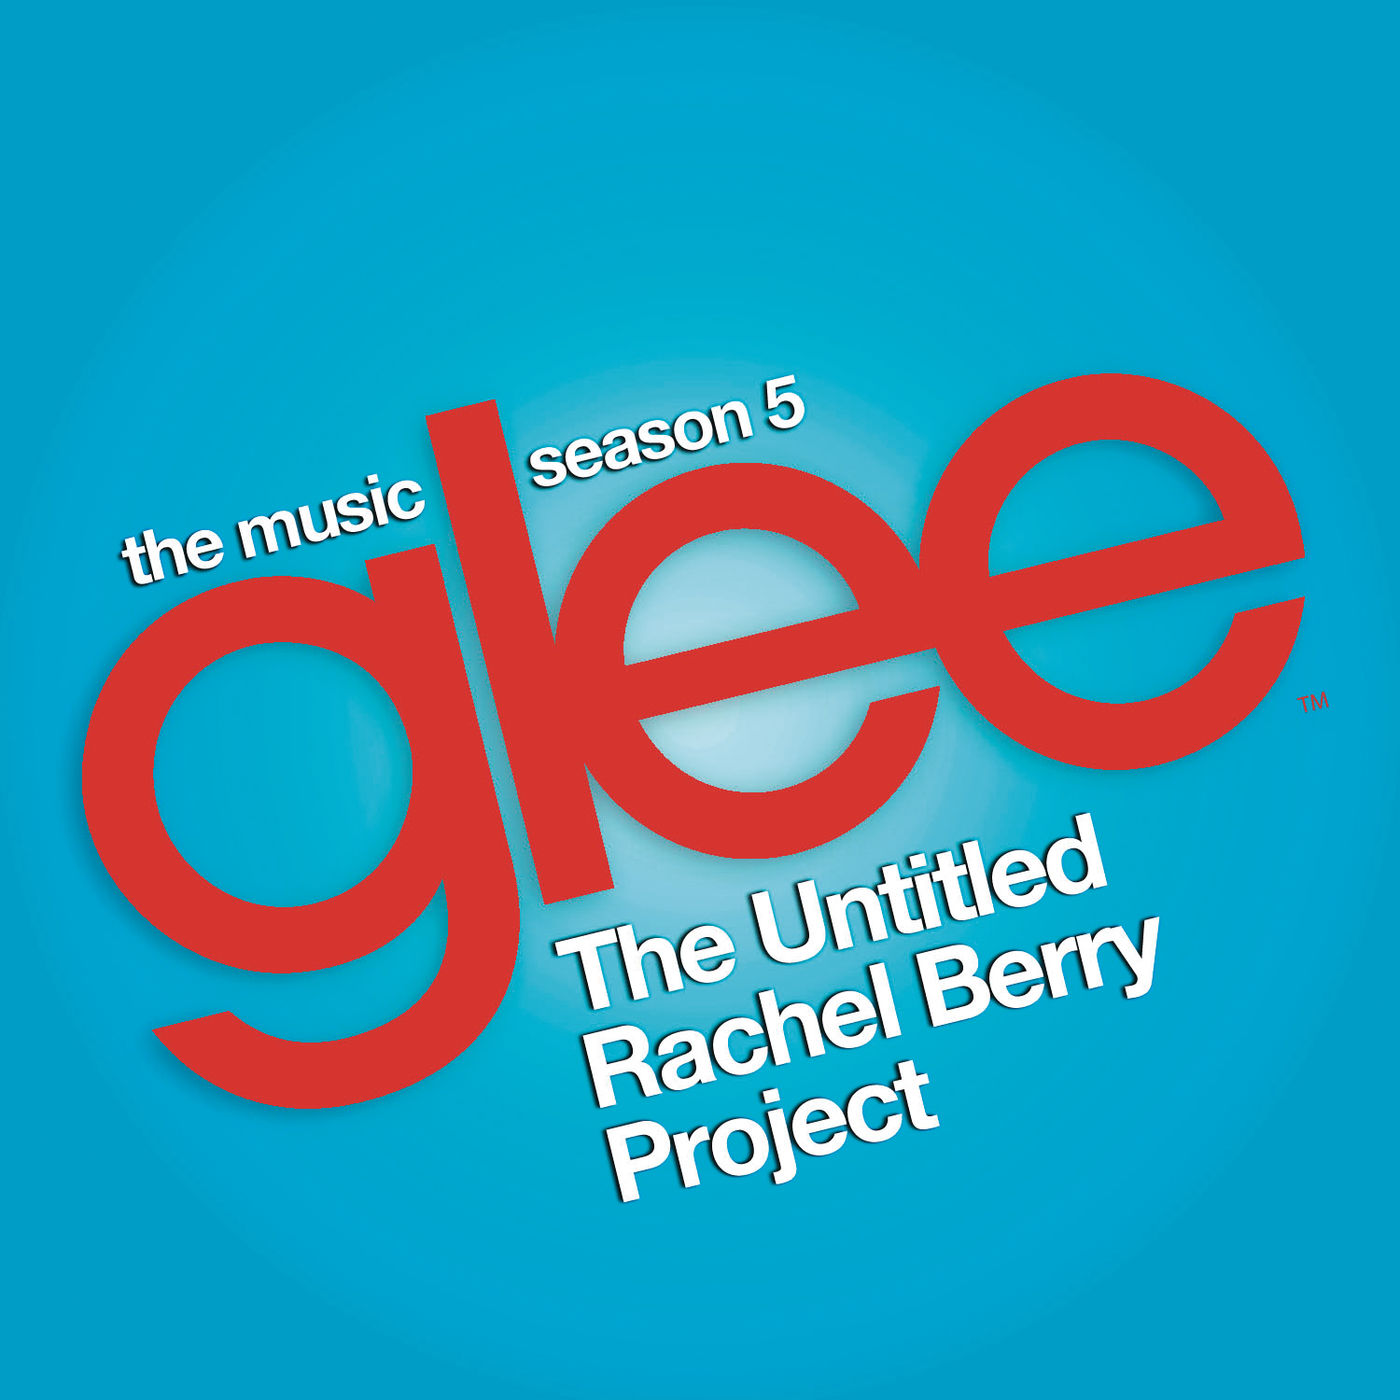 The Music, The Untitled Rachel Berry Project